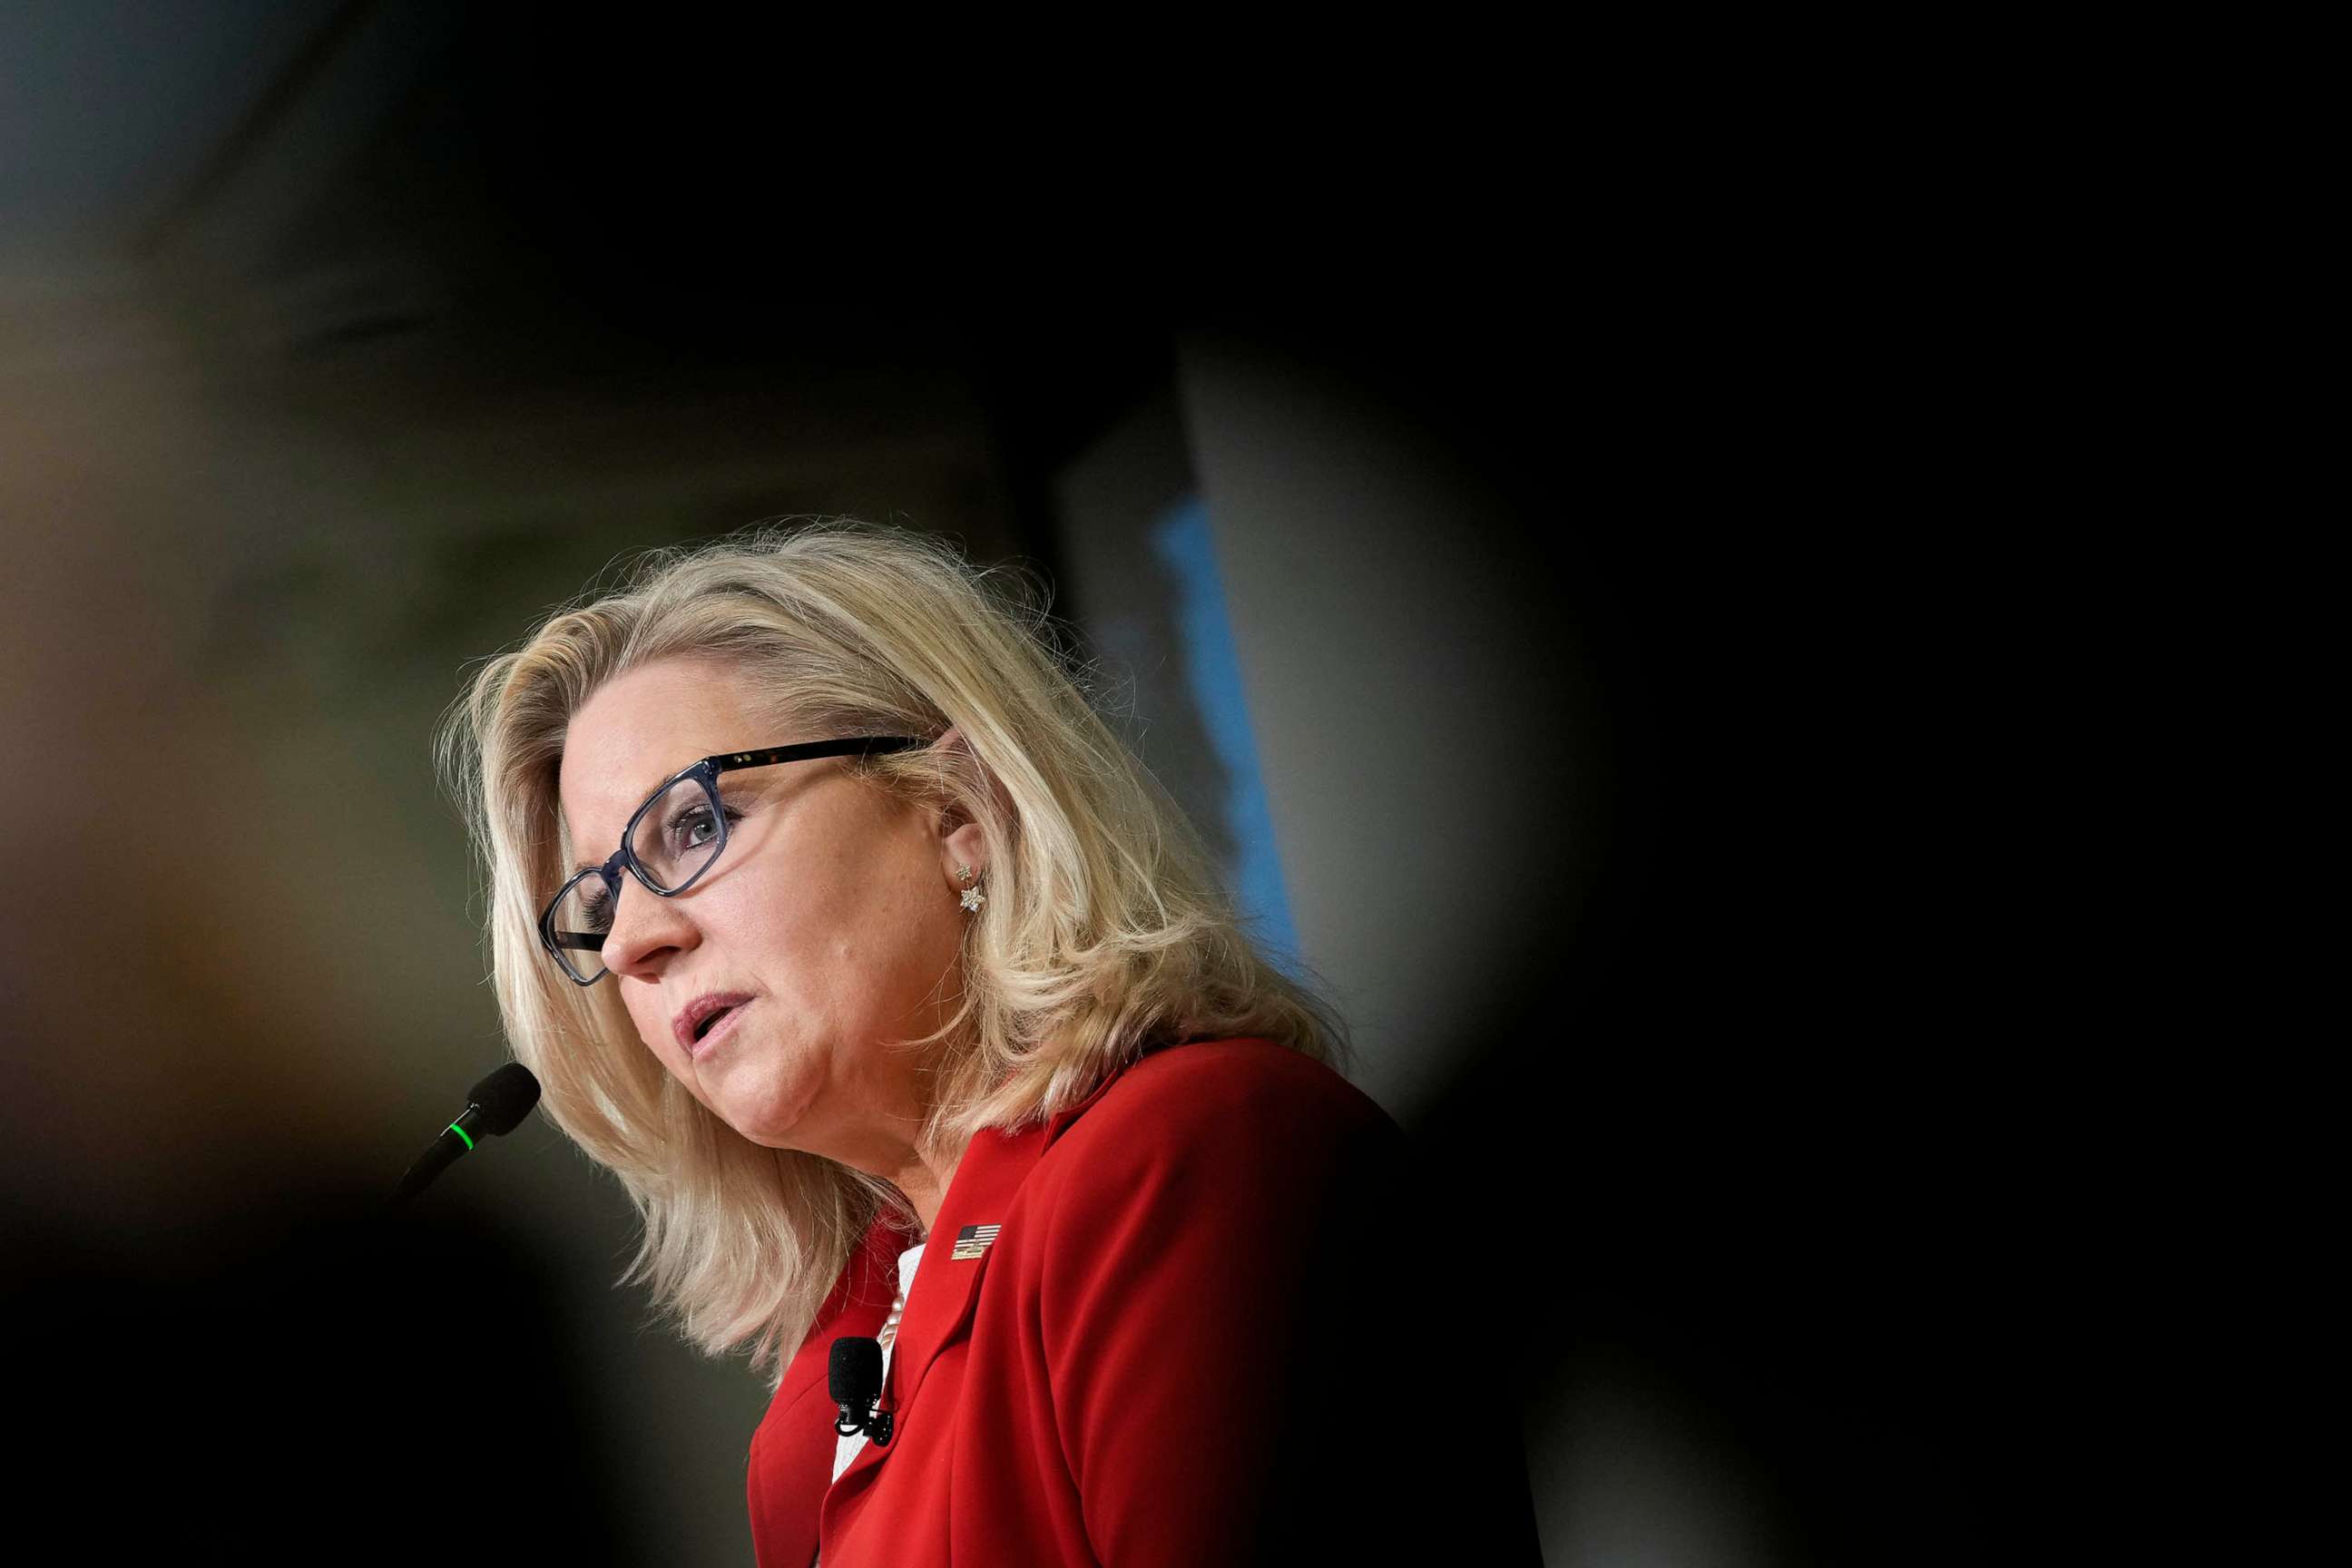 PHOTO: FILE - U.S. Rep. Liz Cheney, vice chairwoman of the Select Committee to Investigate the January 6th Attack on the U.S. Capitol, speaks during a Constitution Day lecture at American Enterprise Institute, Sept. 19, 2022 in Washington, DC.